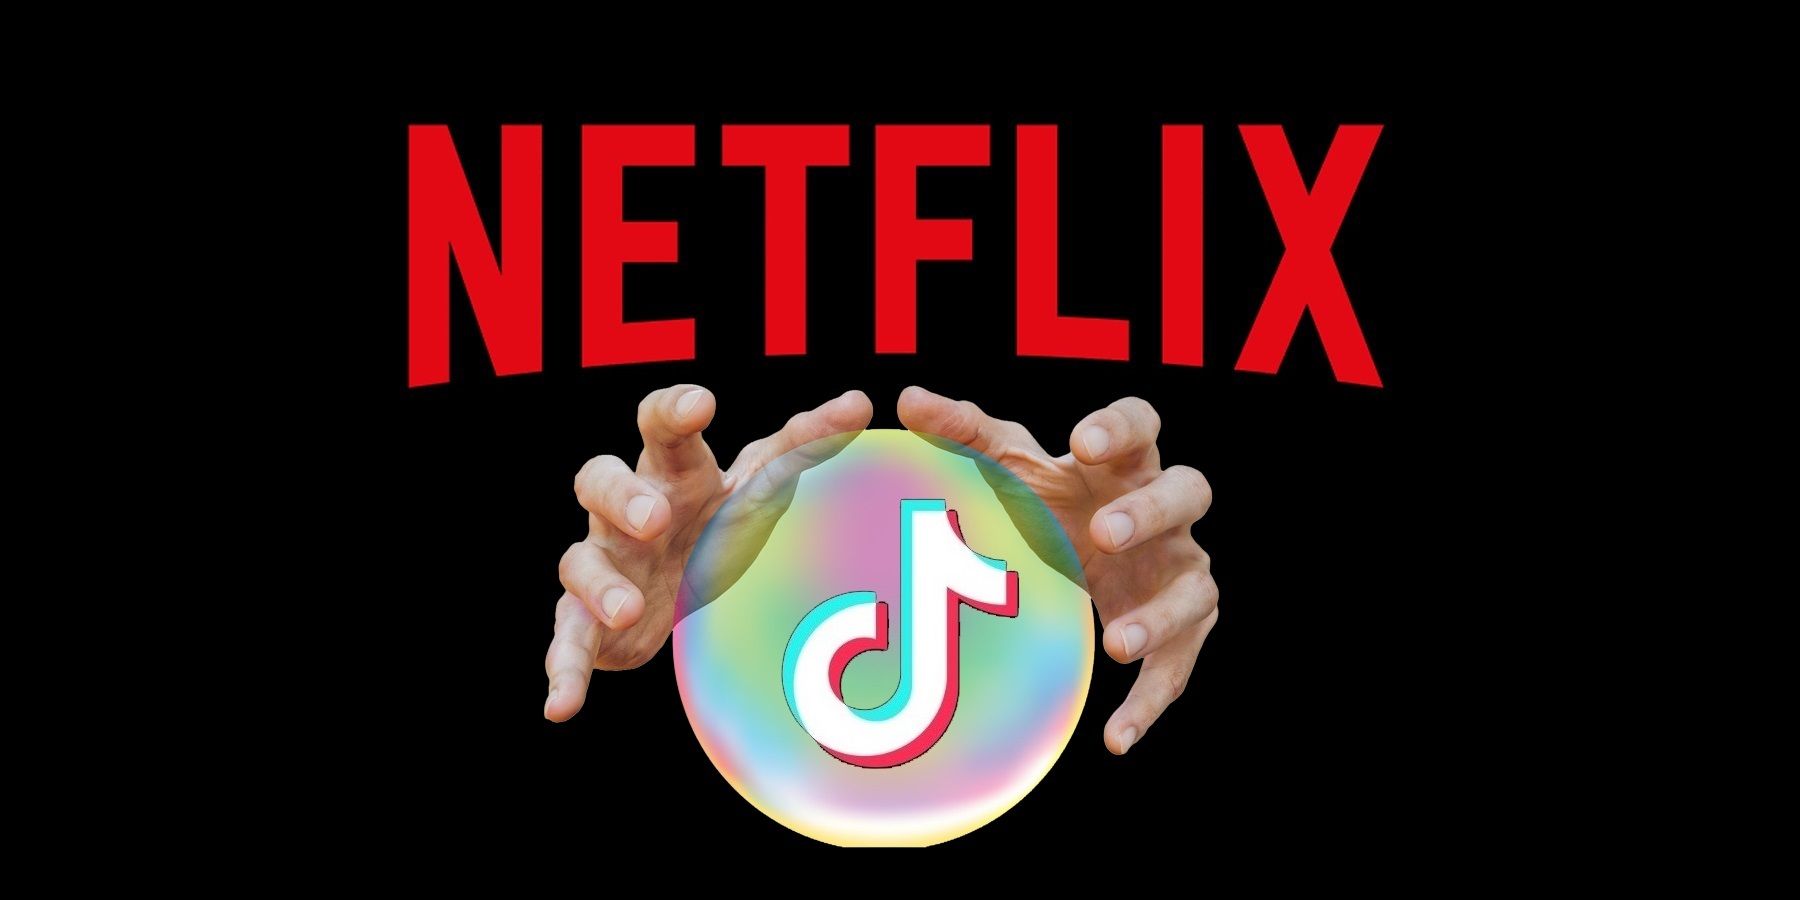 Netflix Names TikTok as a Major Competitor For First Time